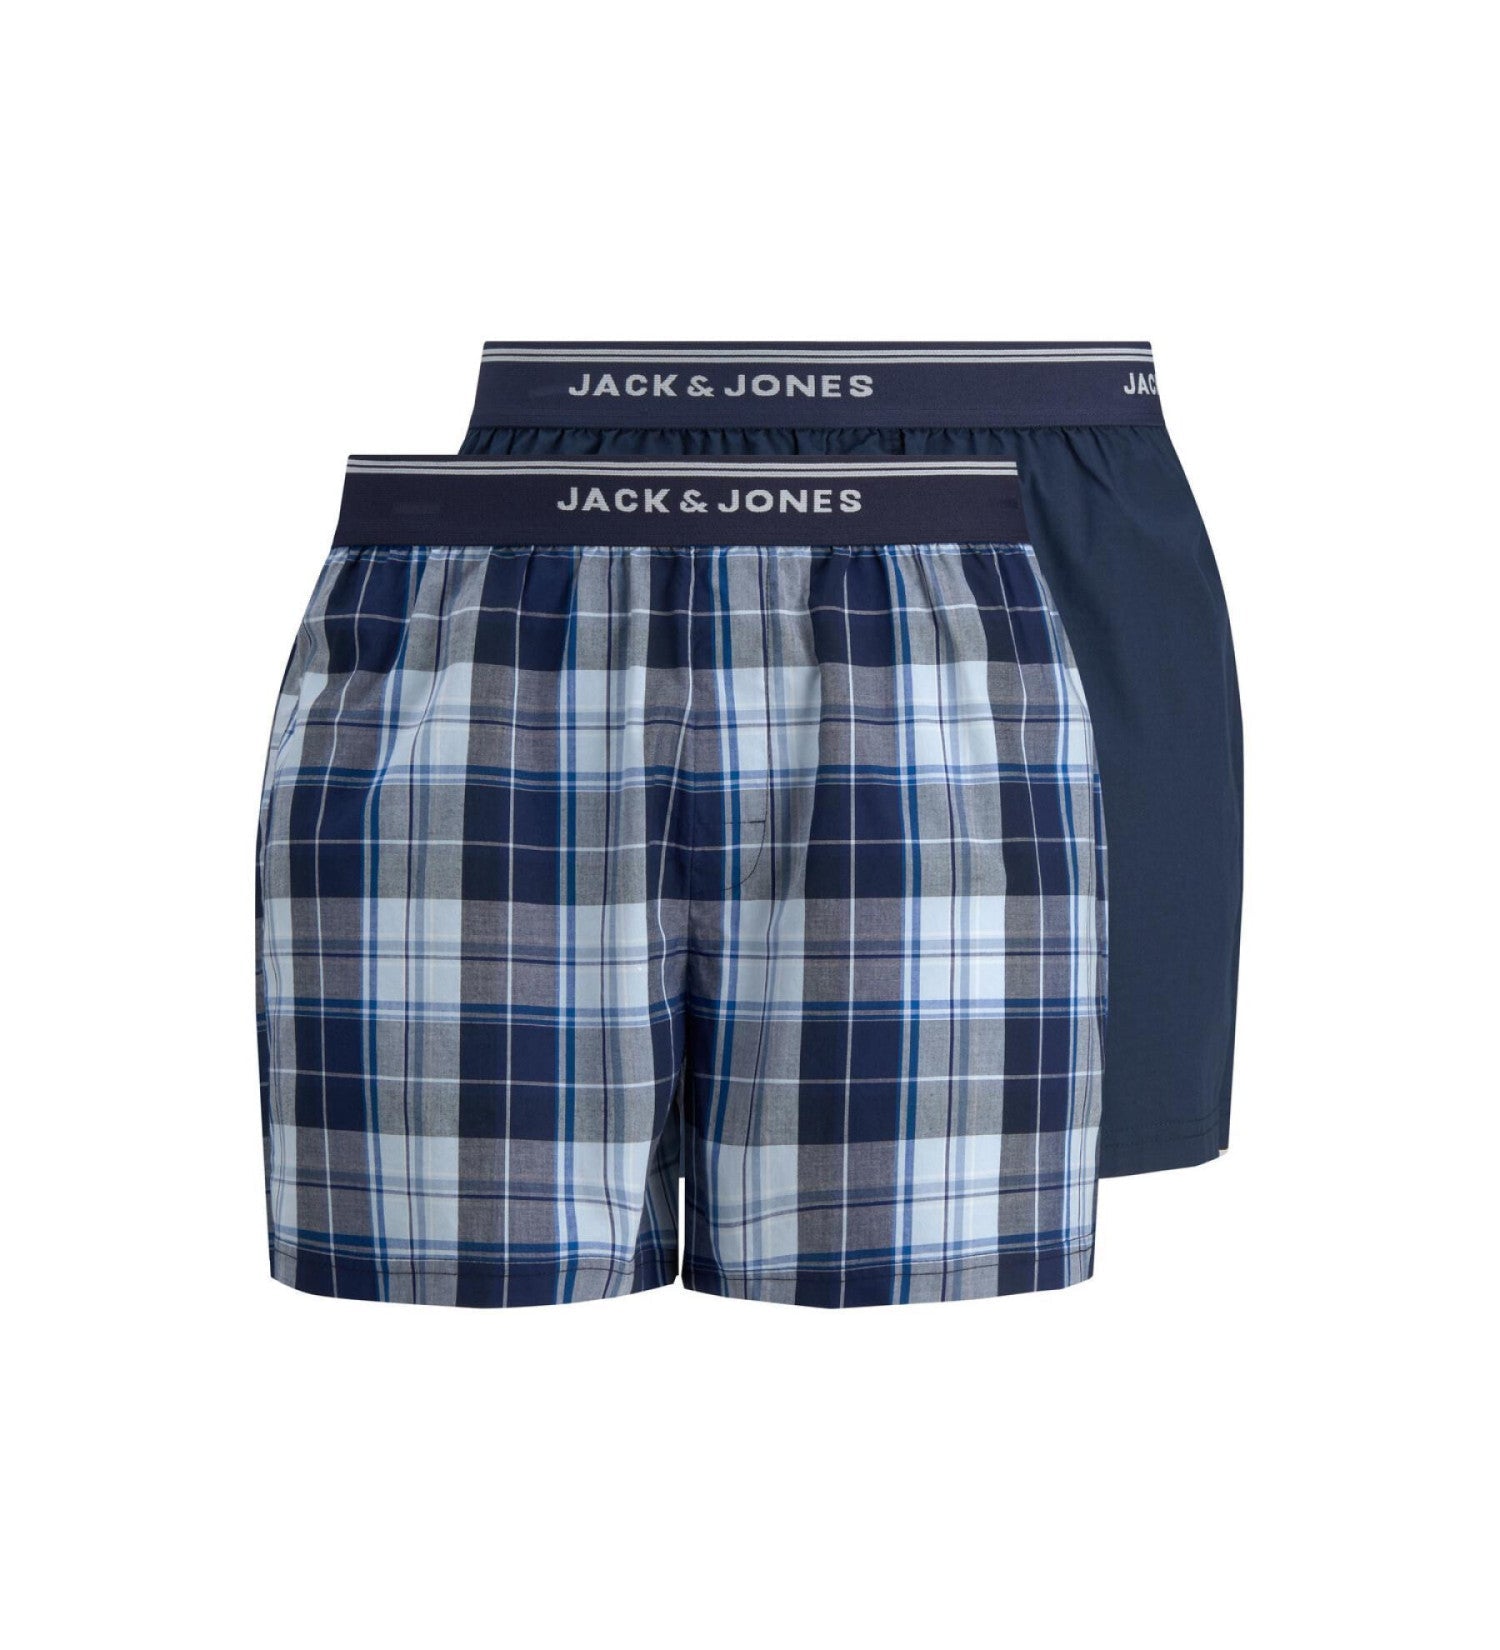 2 pack boxers